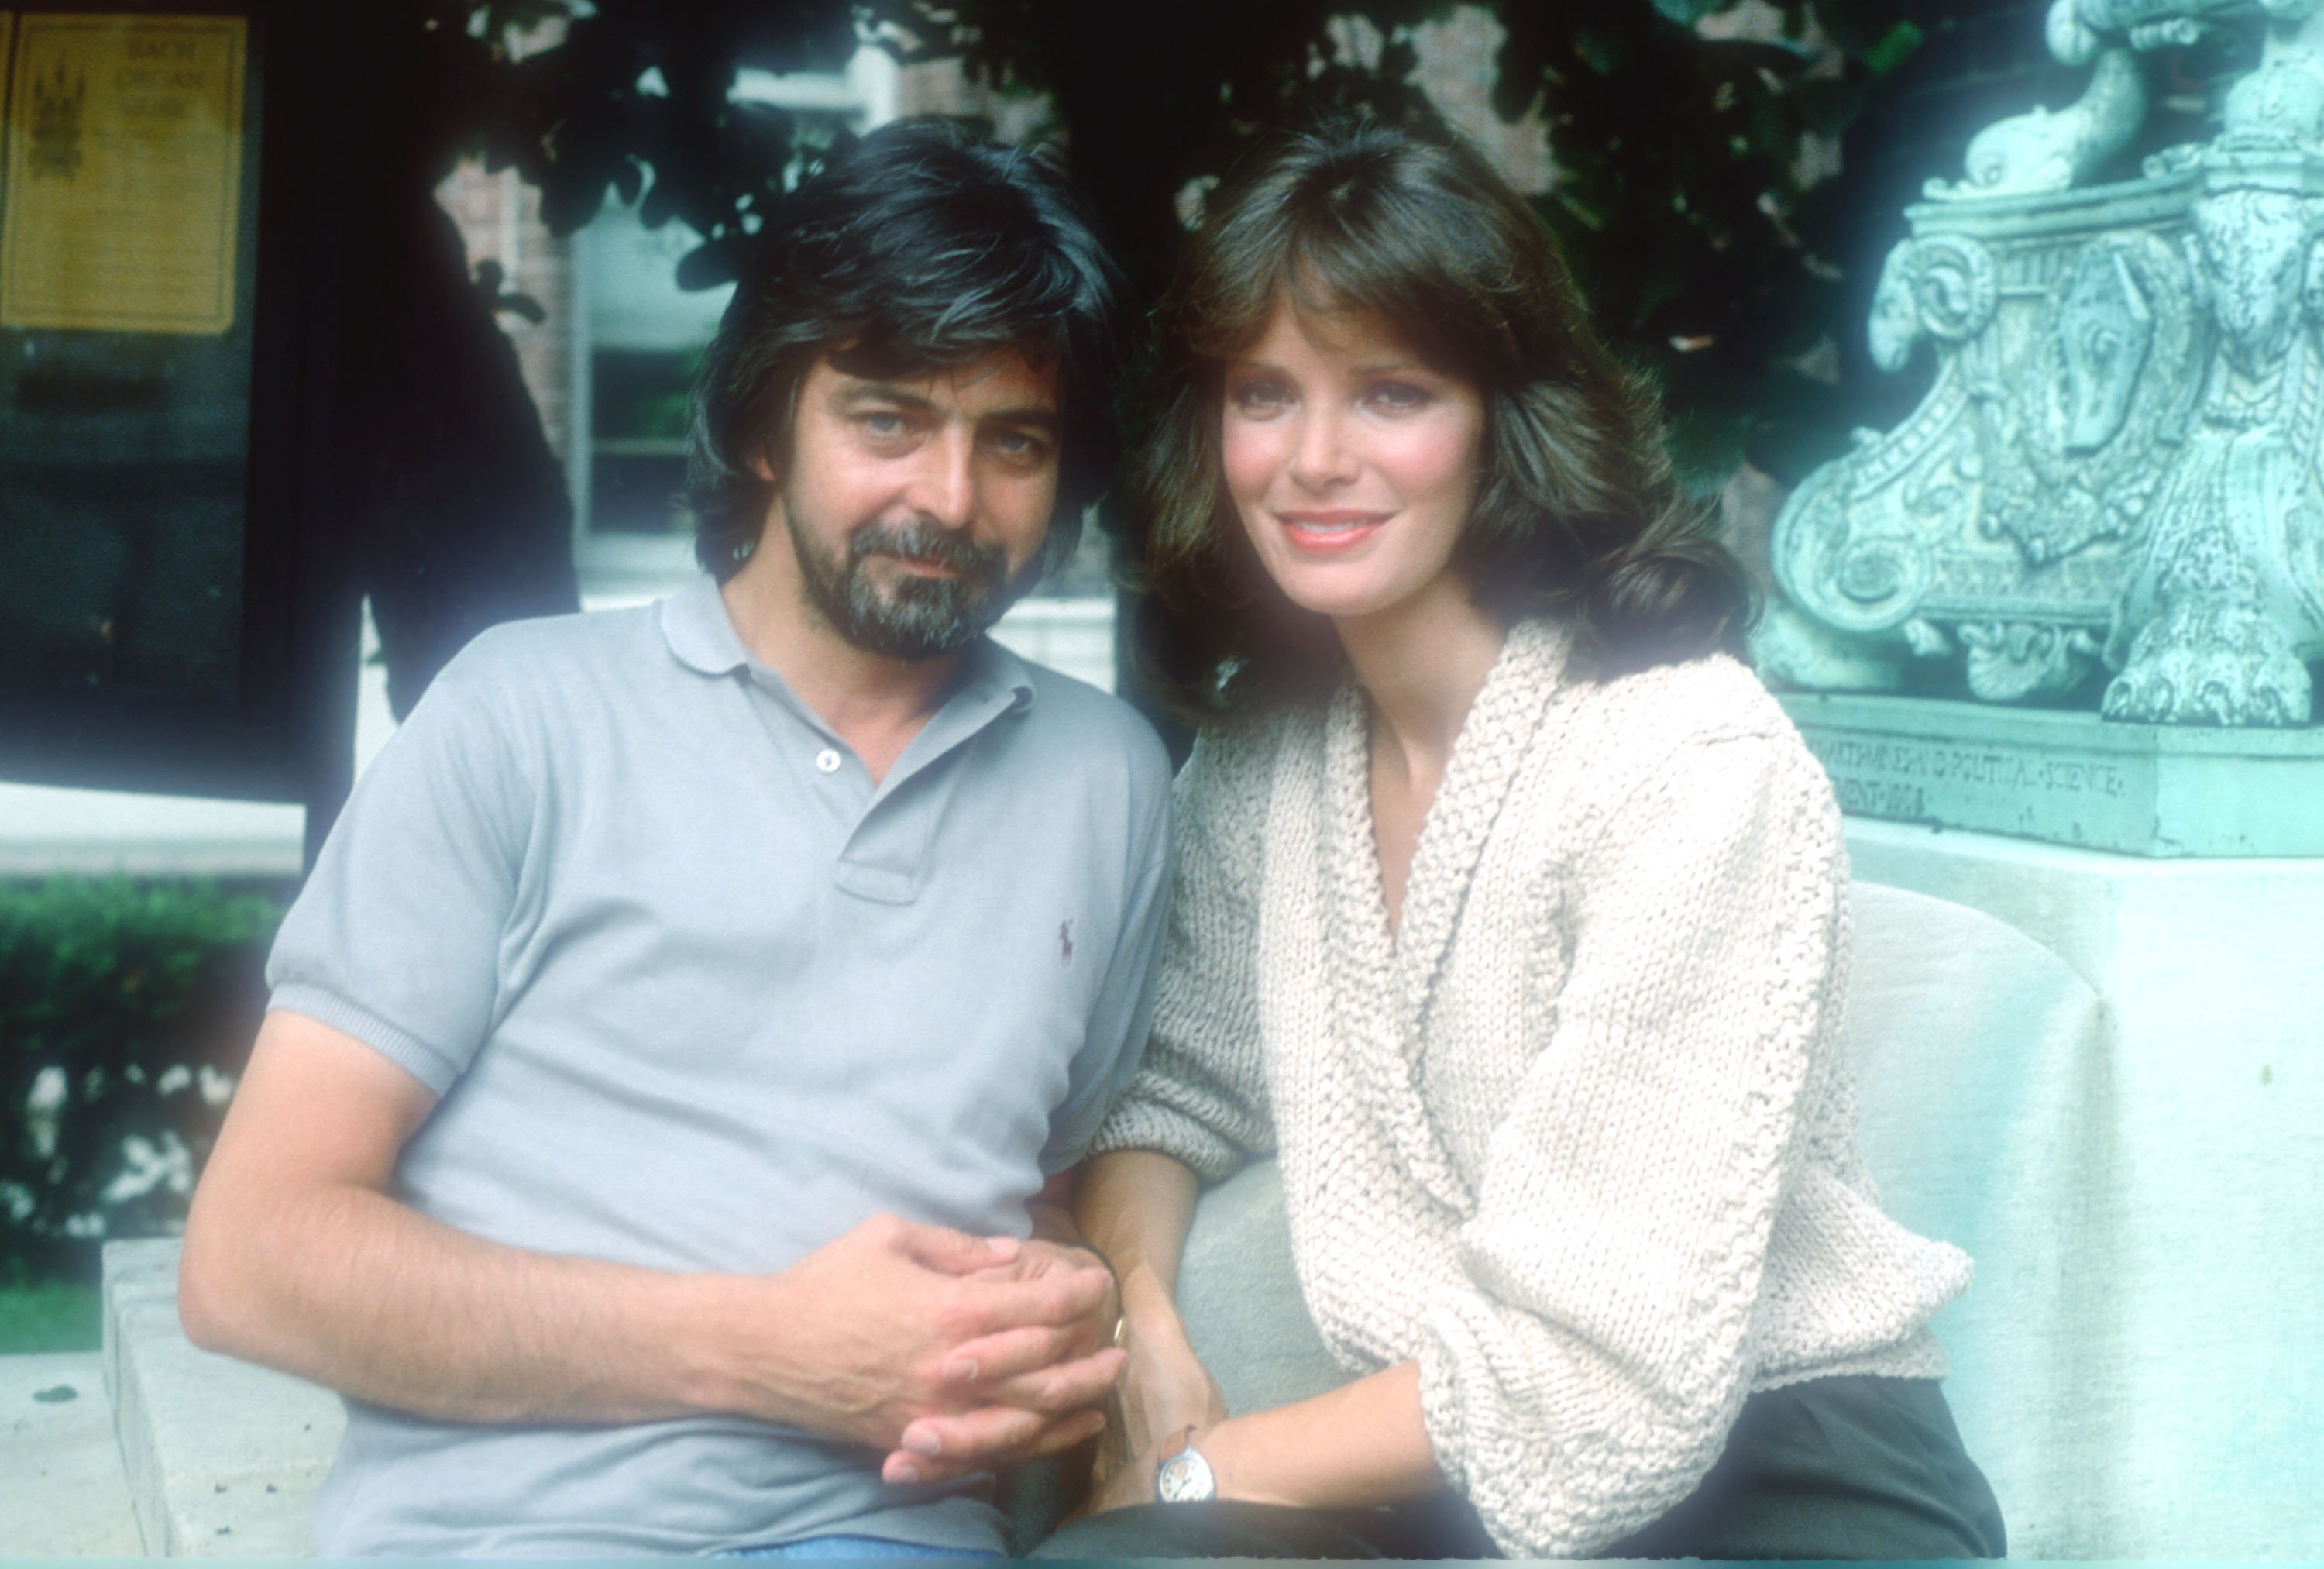 Jaclyn Smith and husband Tony Richmond pose for a photograph on August 23, 1982 in New York City. Photo: Getty Images